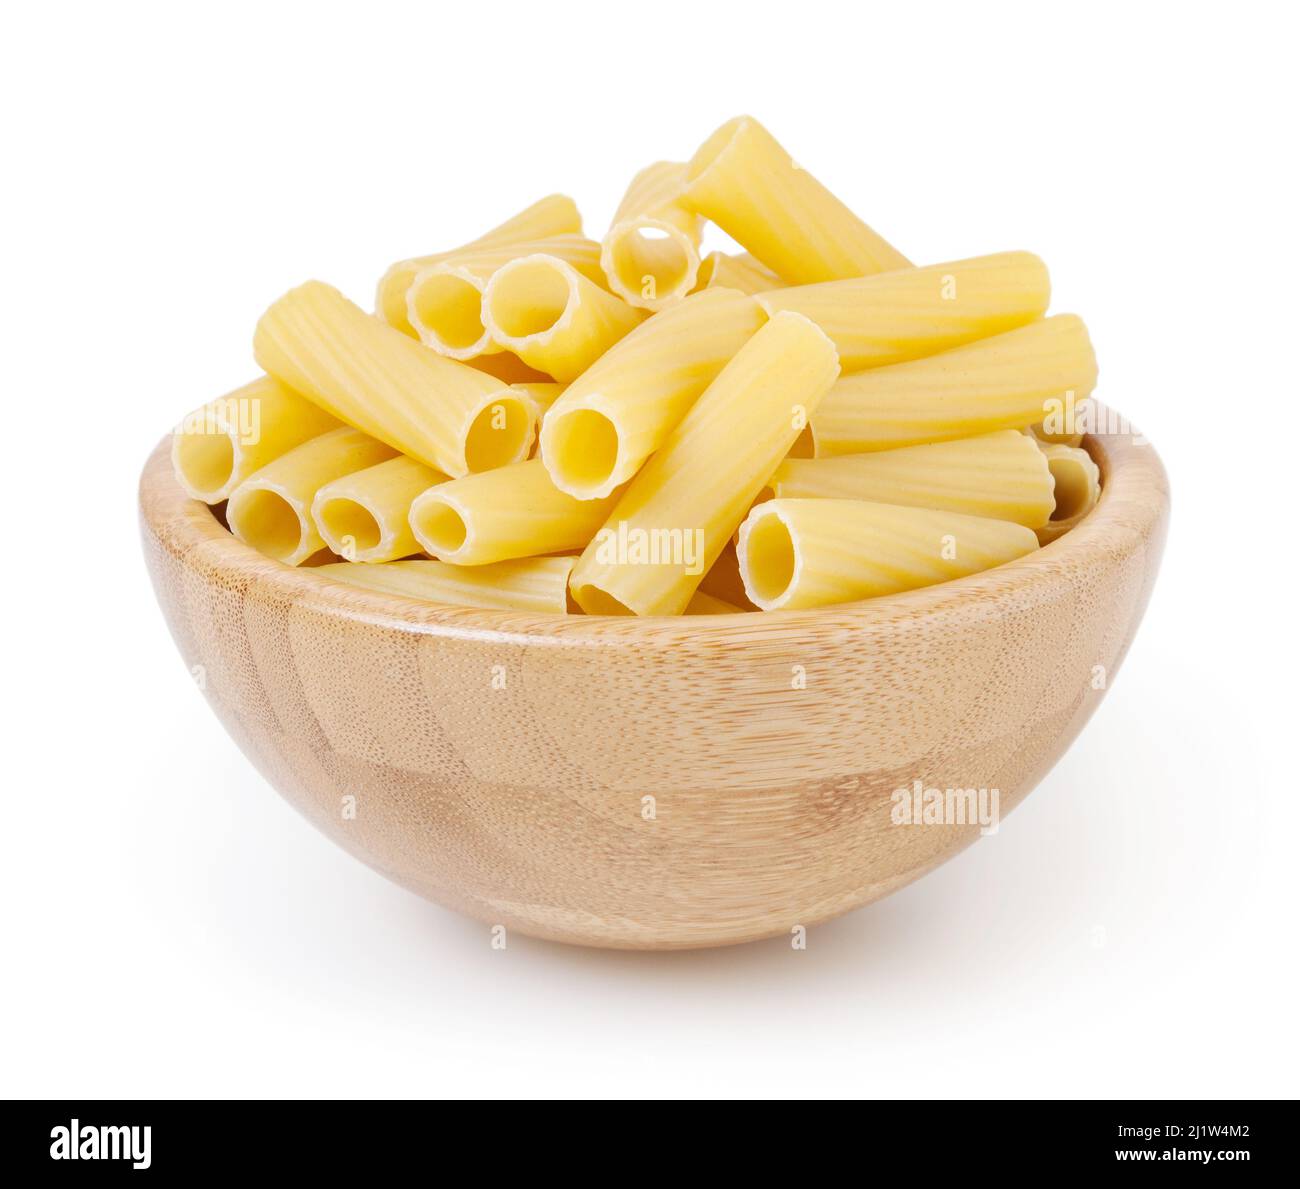 Rigatoni pasta in wooden bowl isolated on white background with clipping path Stock Photo